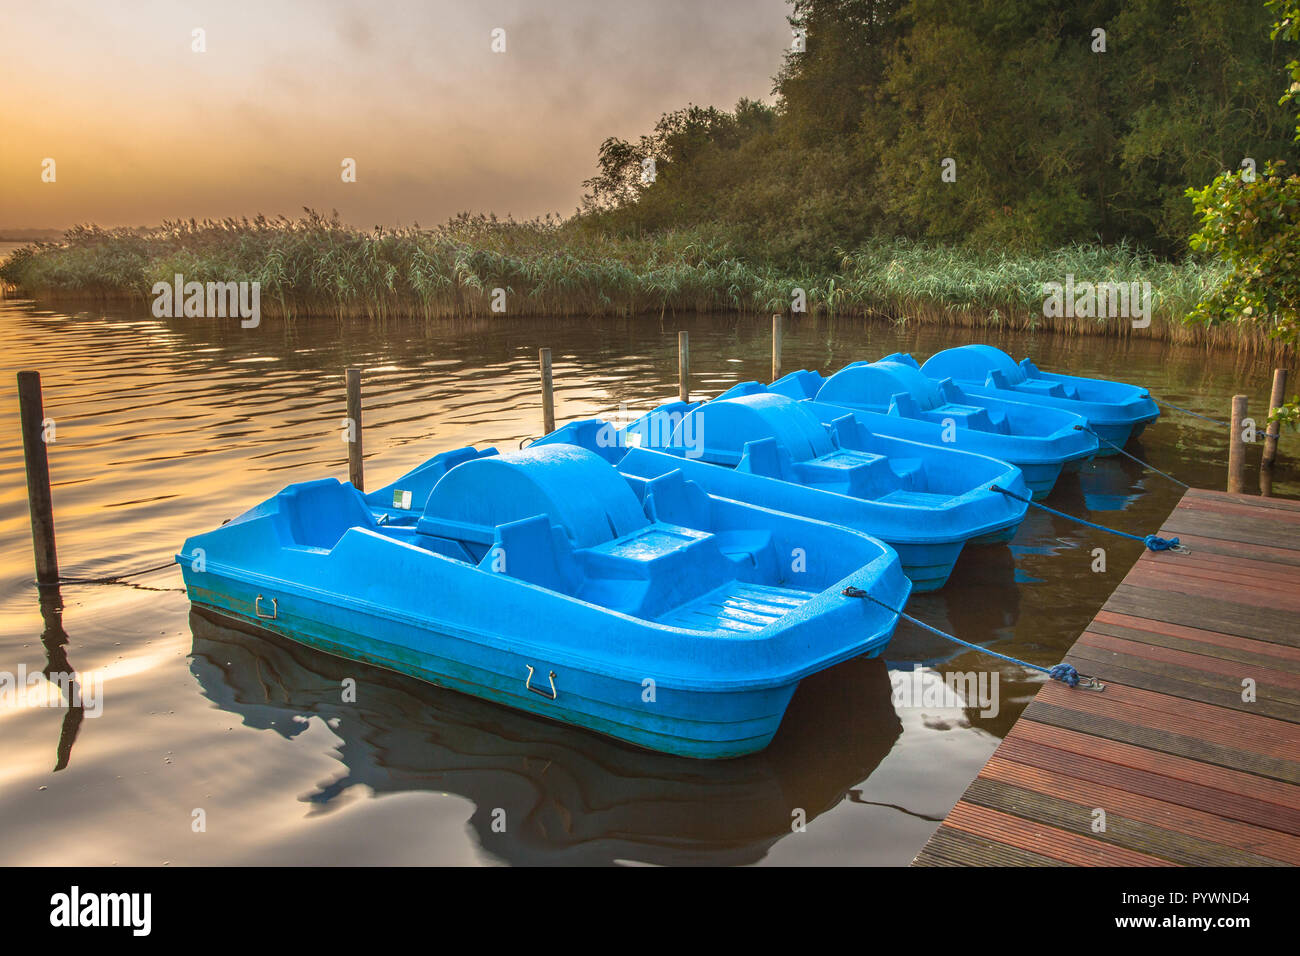 Row of Blue Pedal Rental Boats on a Foggy Morning at Zuidlaardermeer, Netherlands Stock Photo